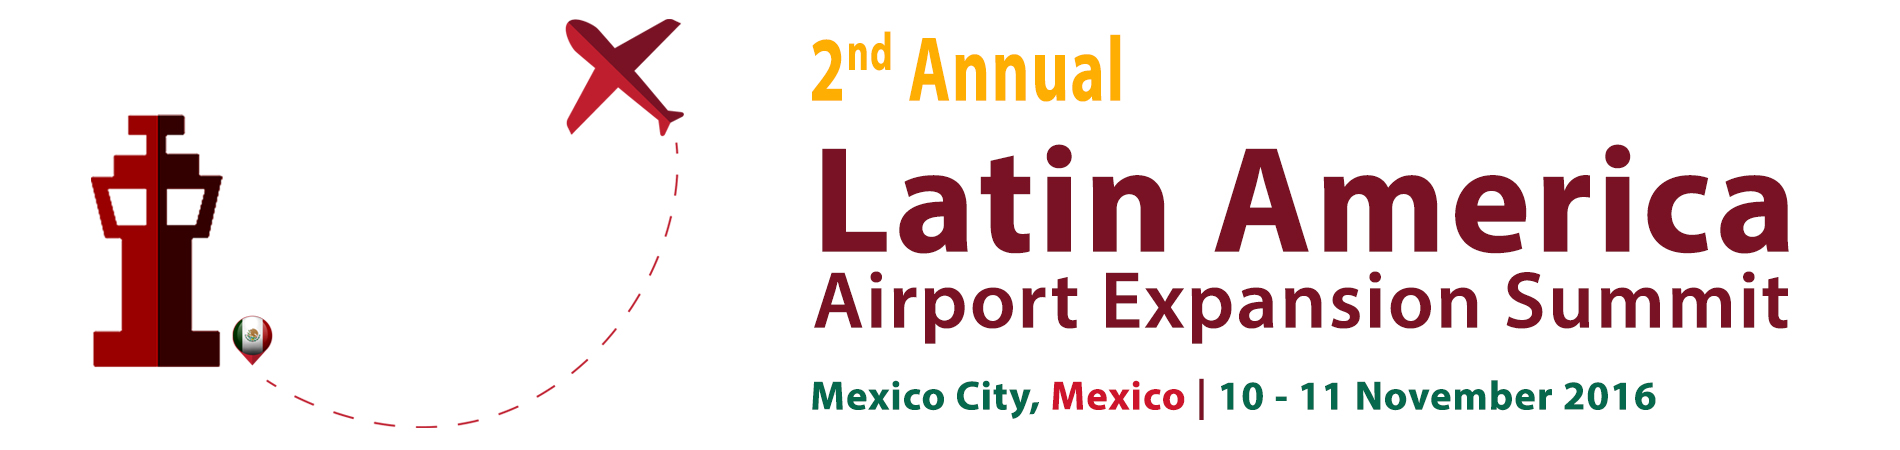 2nd Annual Latin America Airport Expansion Summit